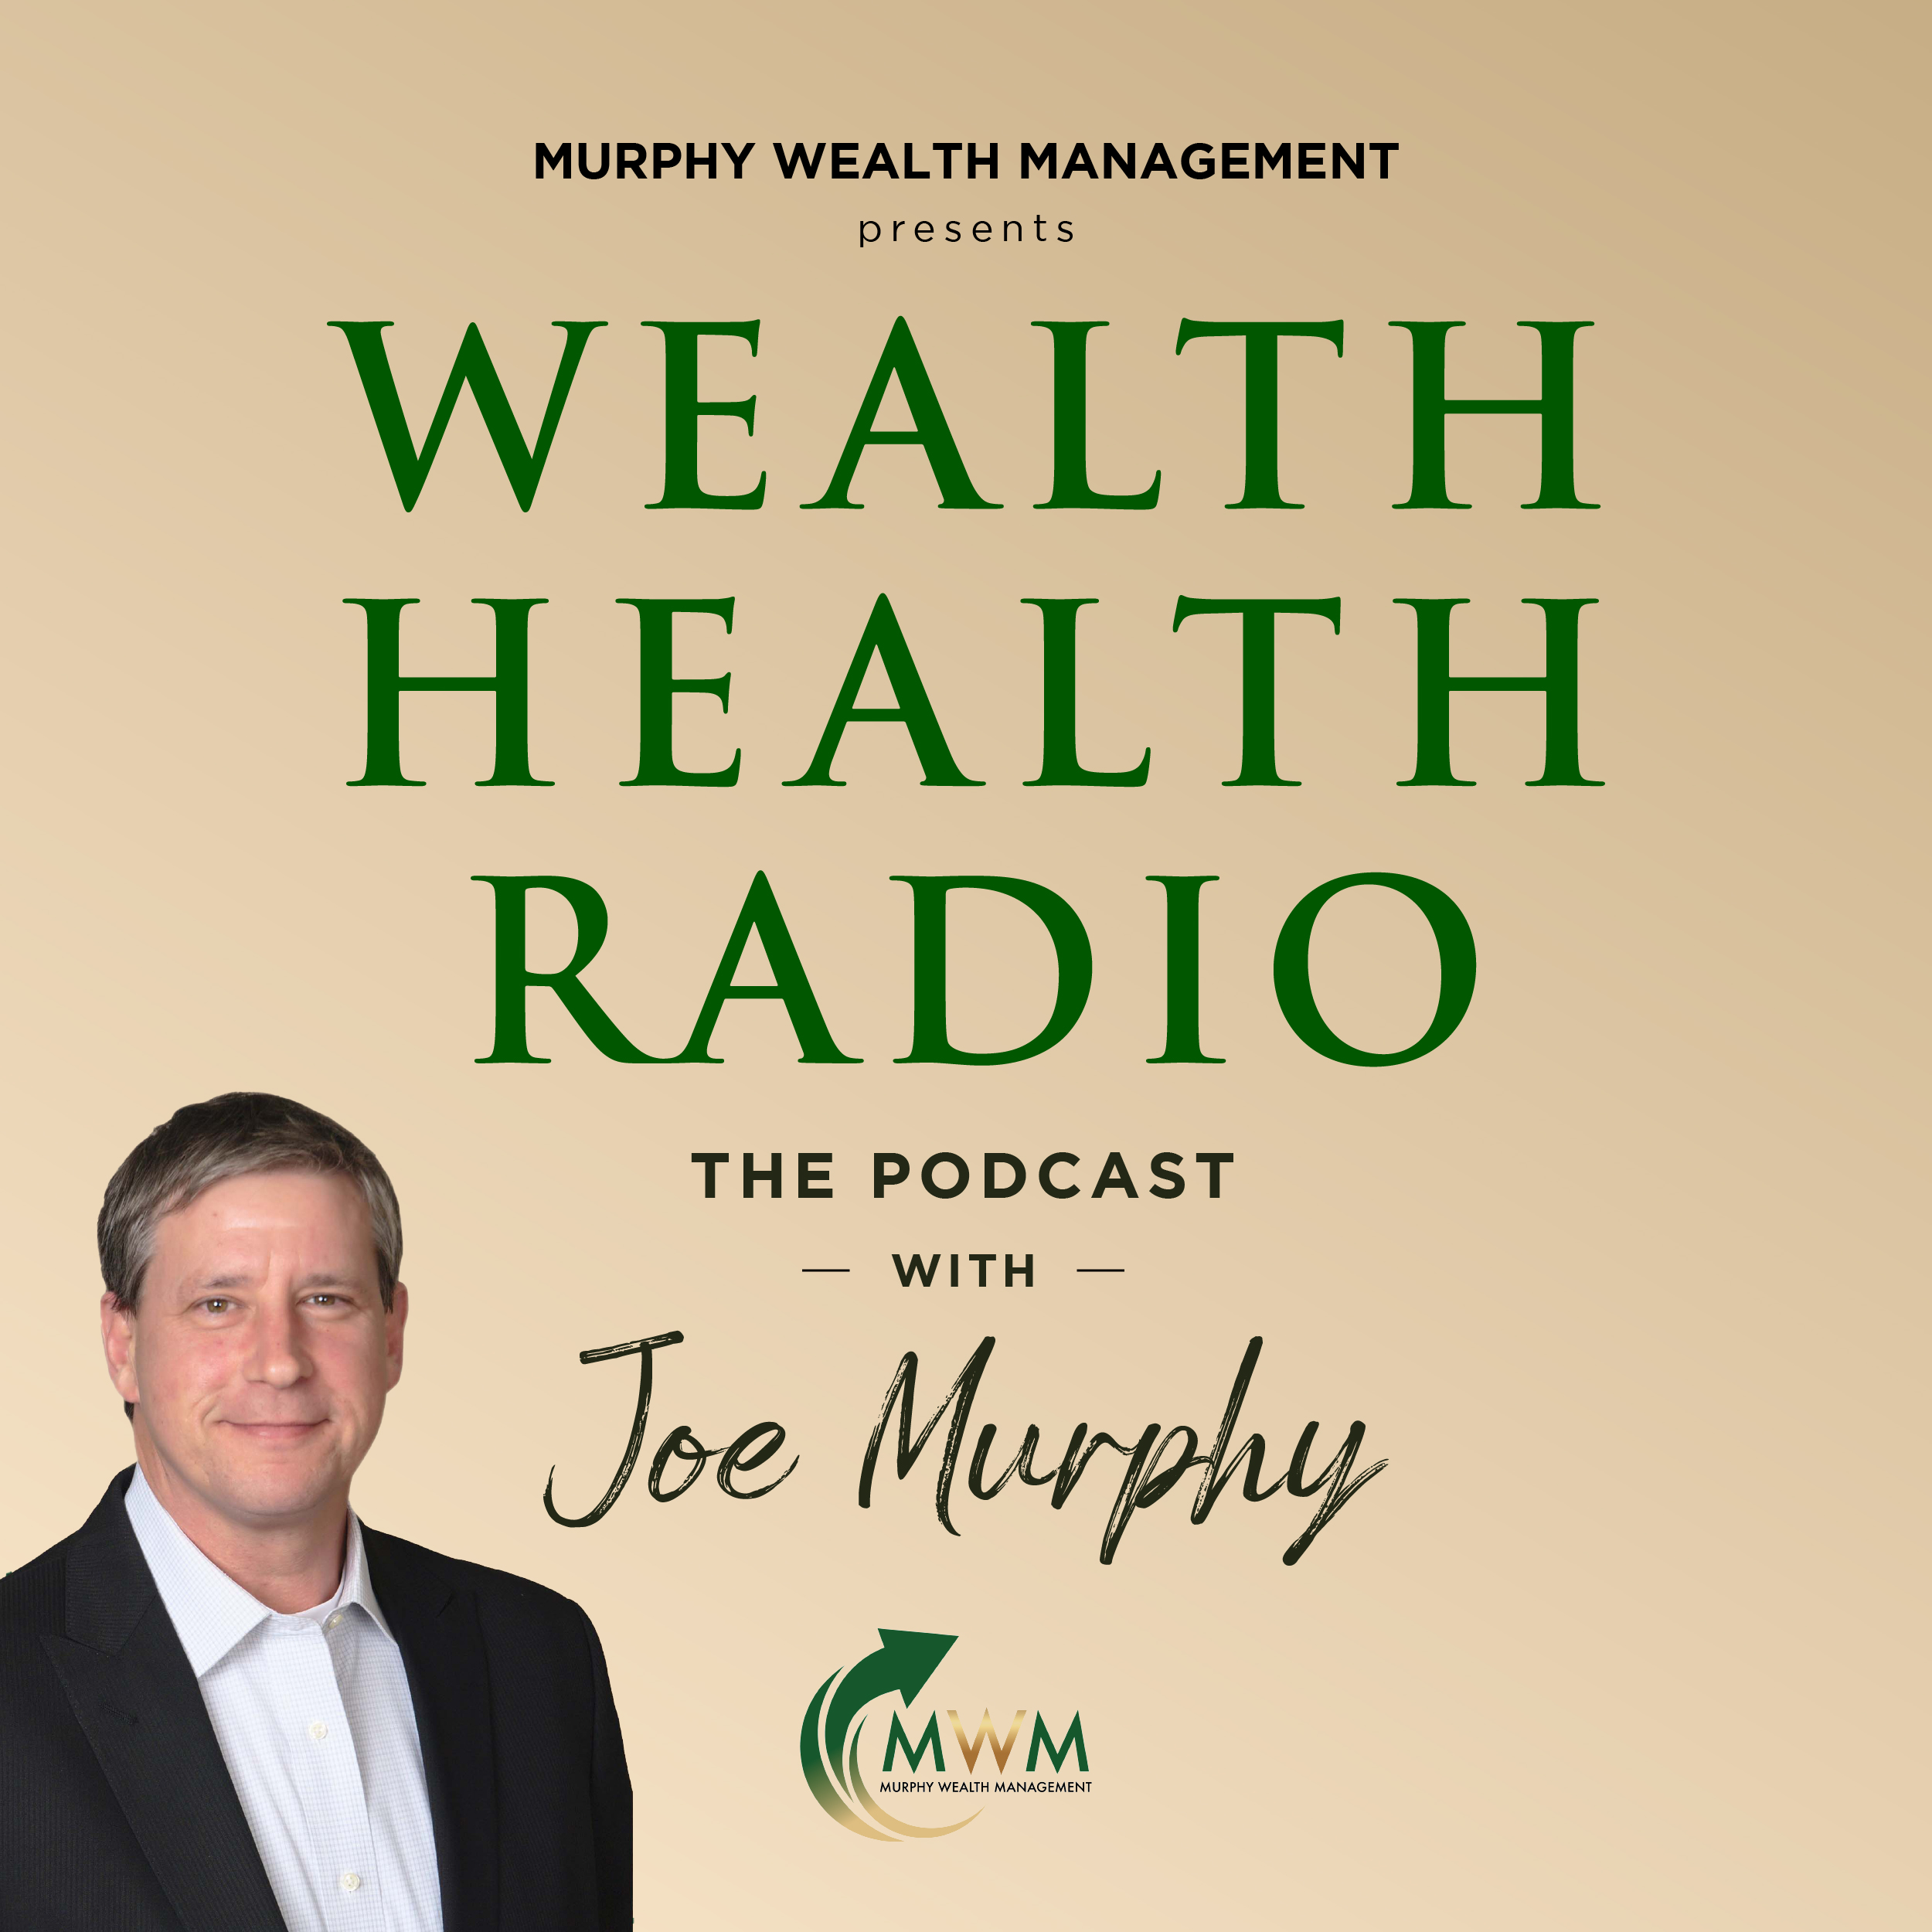 Wealth Health Radio This week Joe Murphy has the results of a new survey that digs into retirees and pre-retirees and how they are feeling about the current state of the economy.